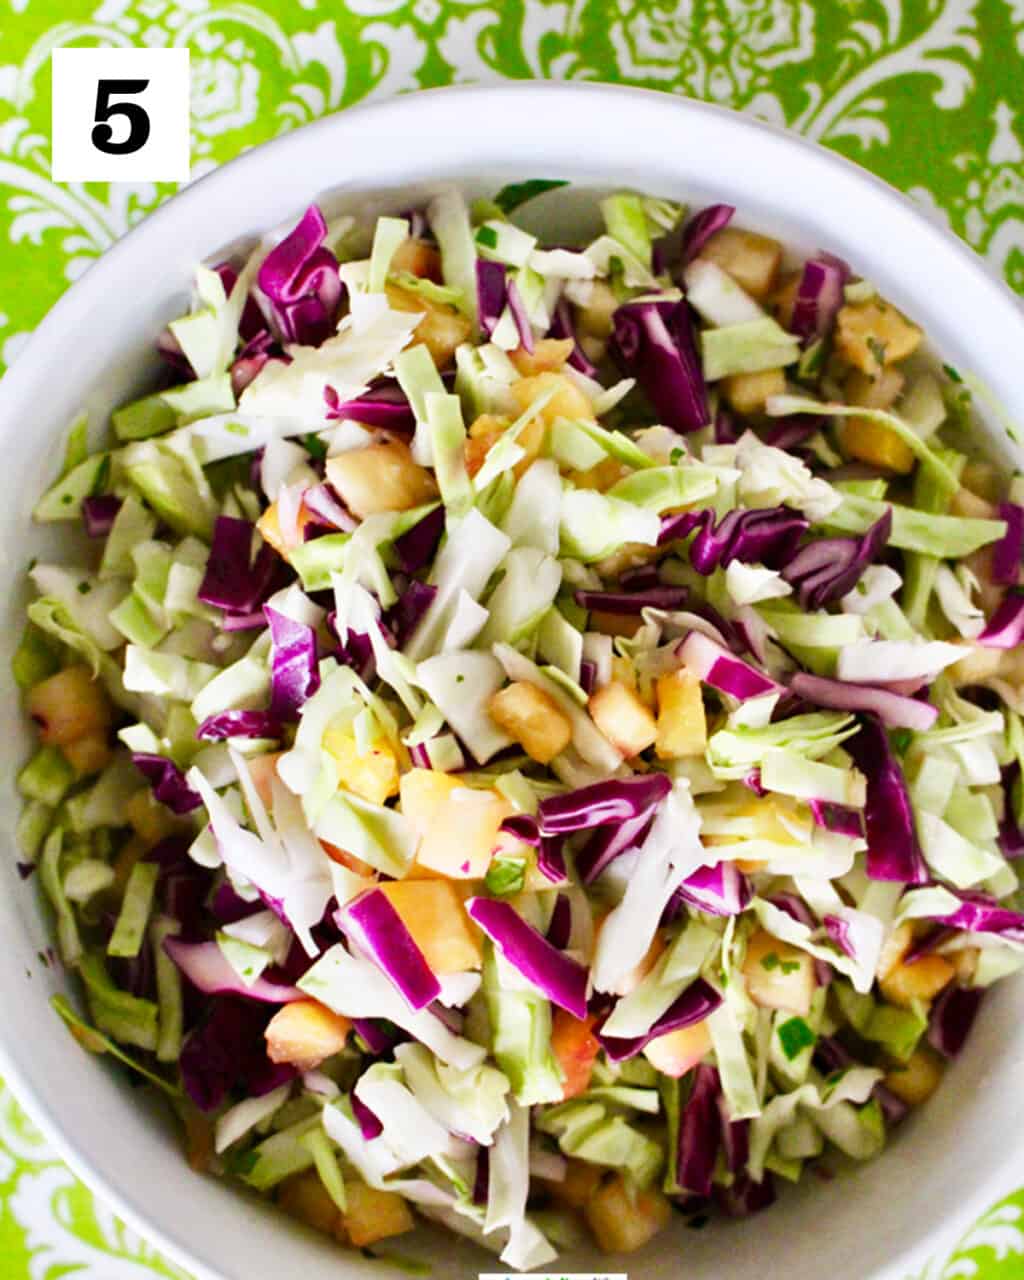 pineapple slaw with cabbage and cilantro in a white bowl.